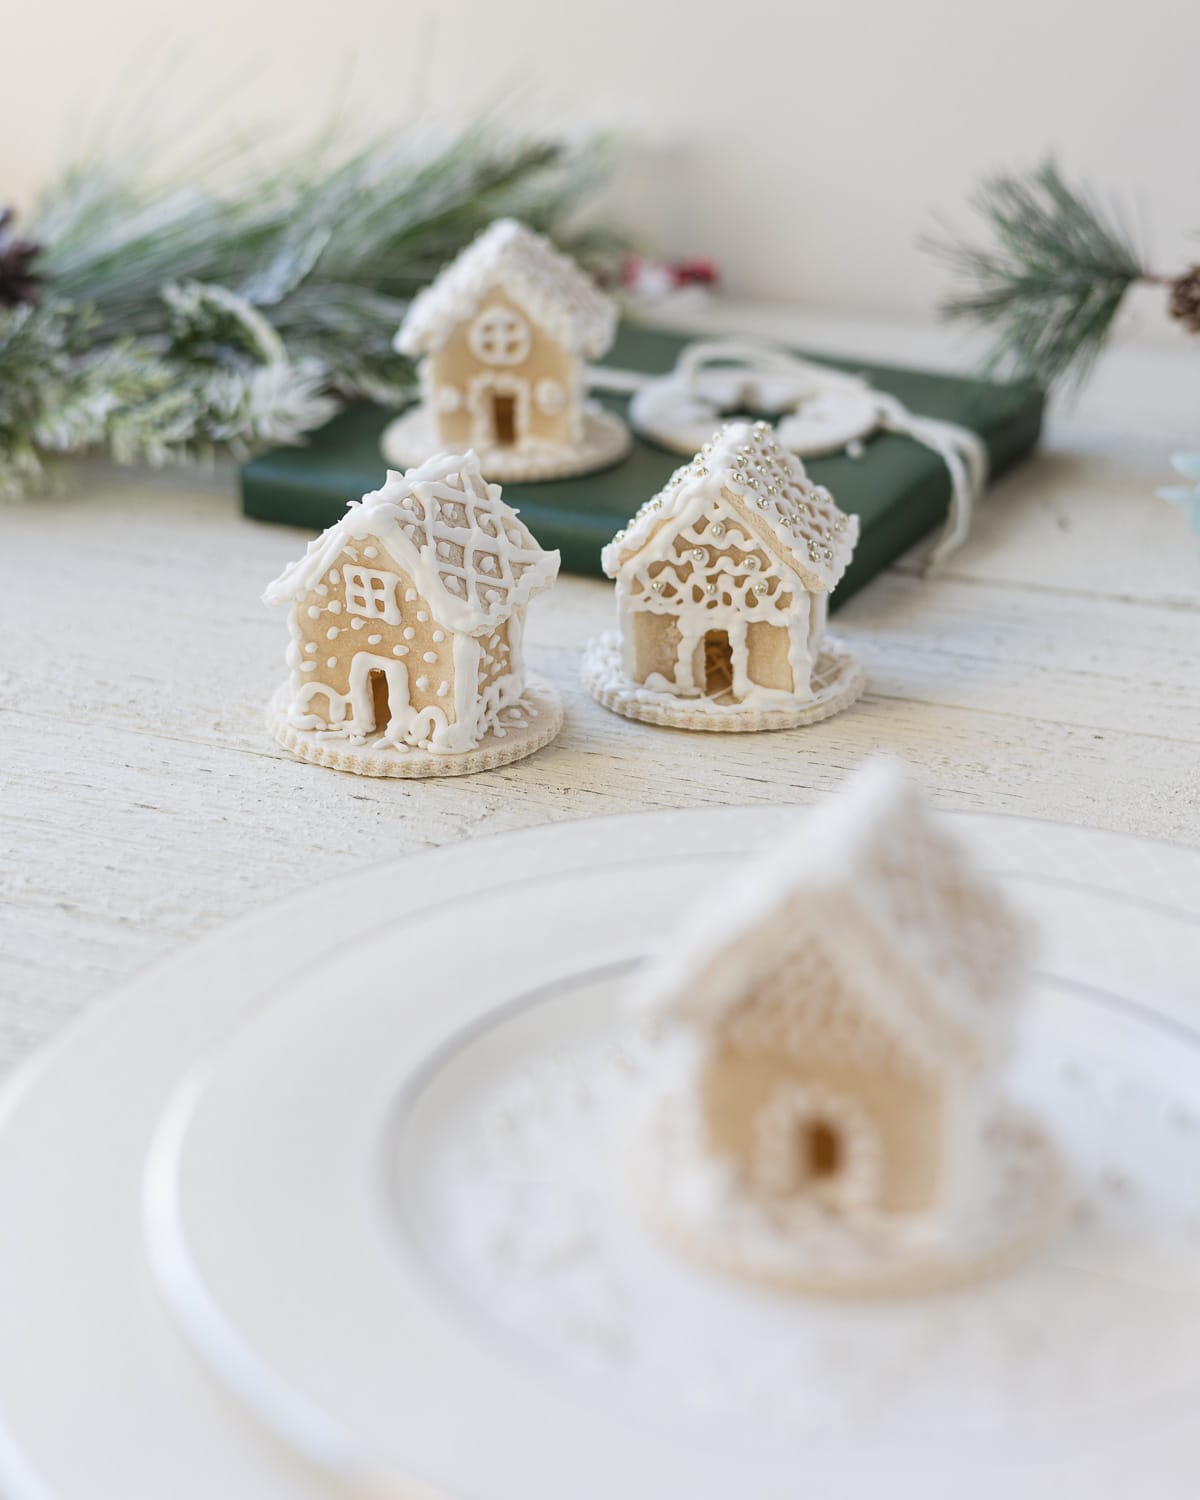 Mini gingerbread houses decorated with royal icing.